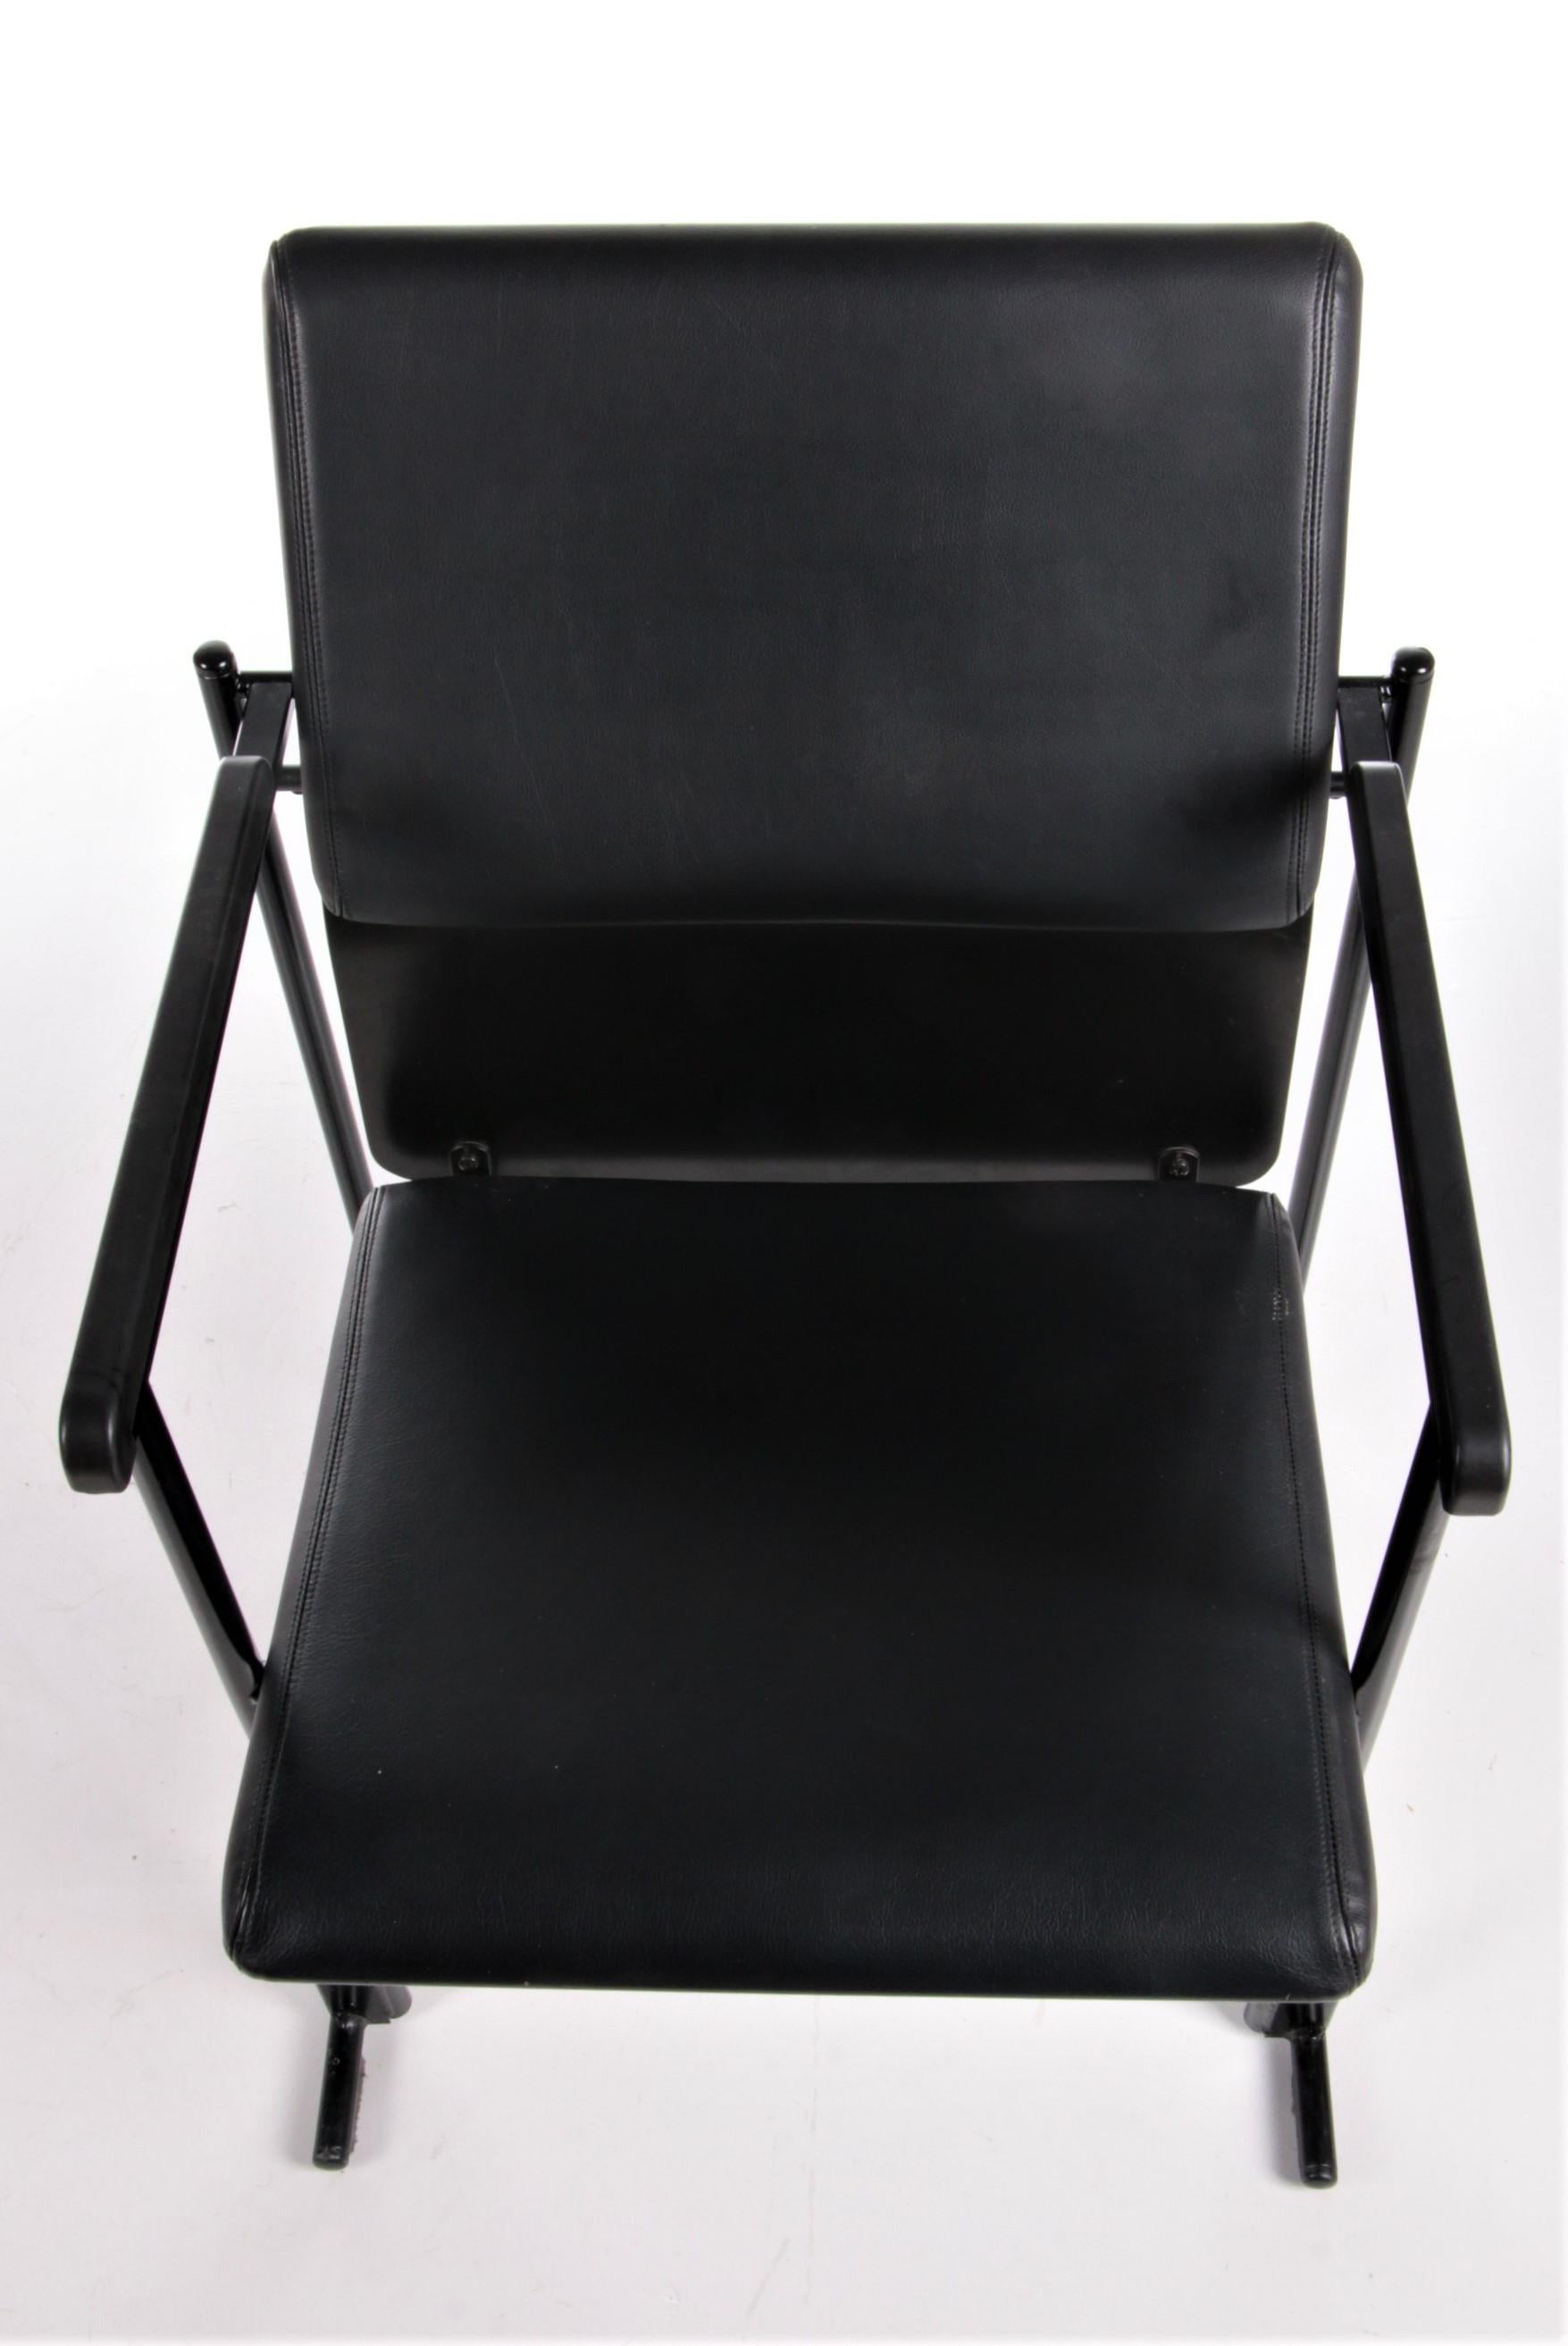 Yrjö Kukkapuro Leather Dining Chair Made by Avarte, Finland 1970 For Sale 7